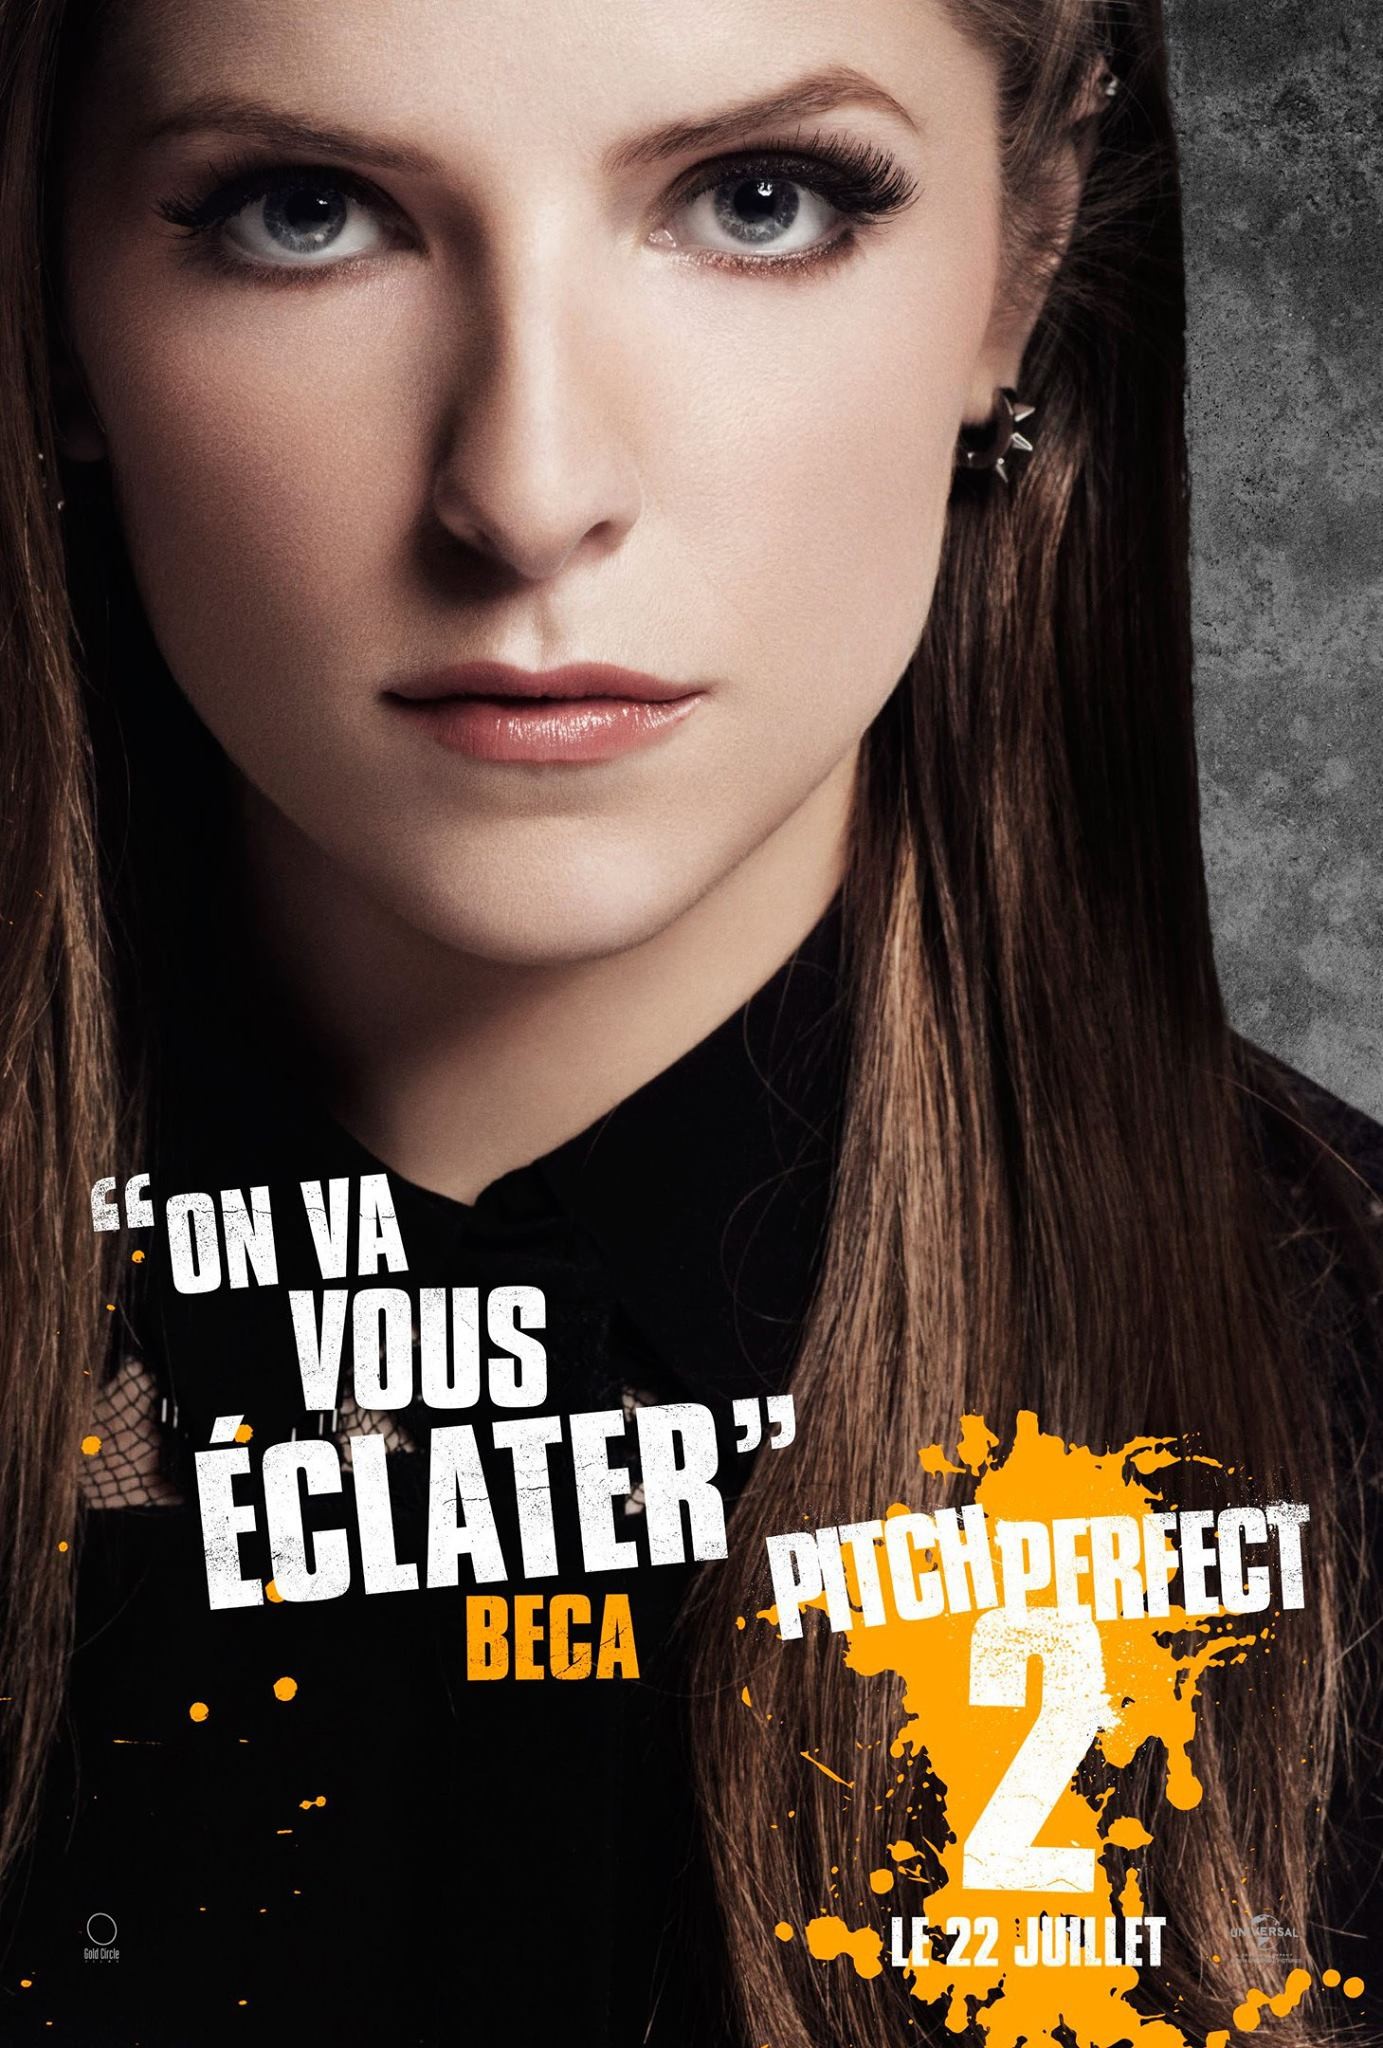 Mega Sized Movie Poster Image for Pitch Perfect 2 (#14 of 15)